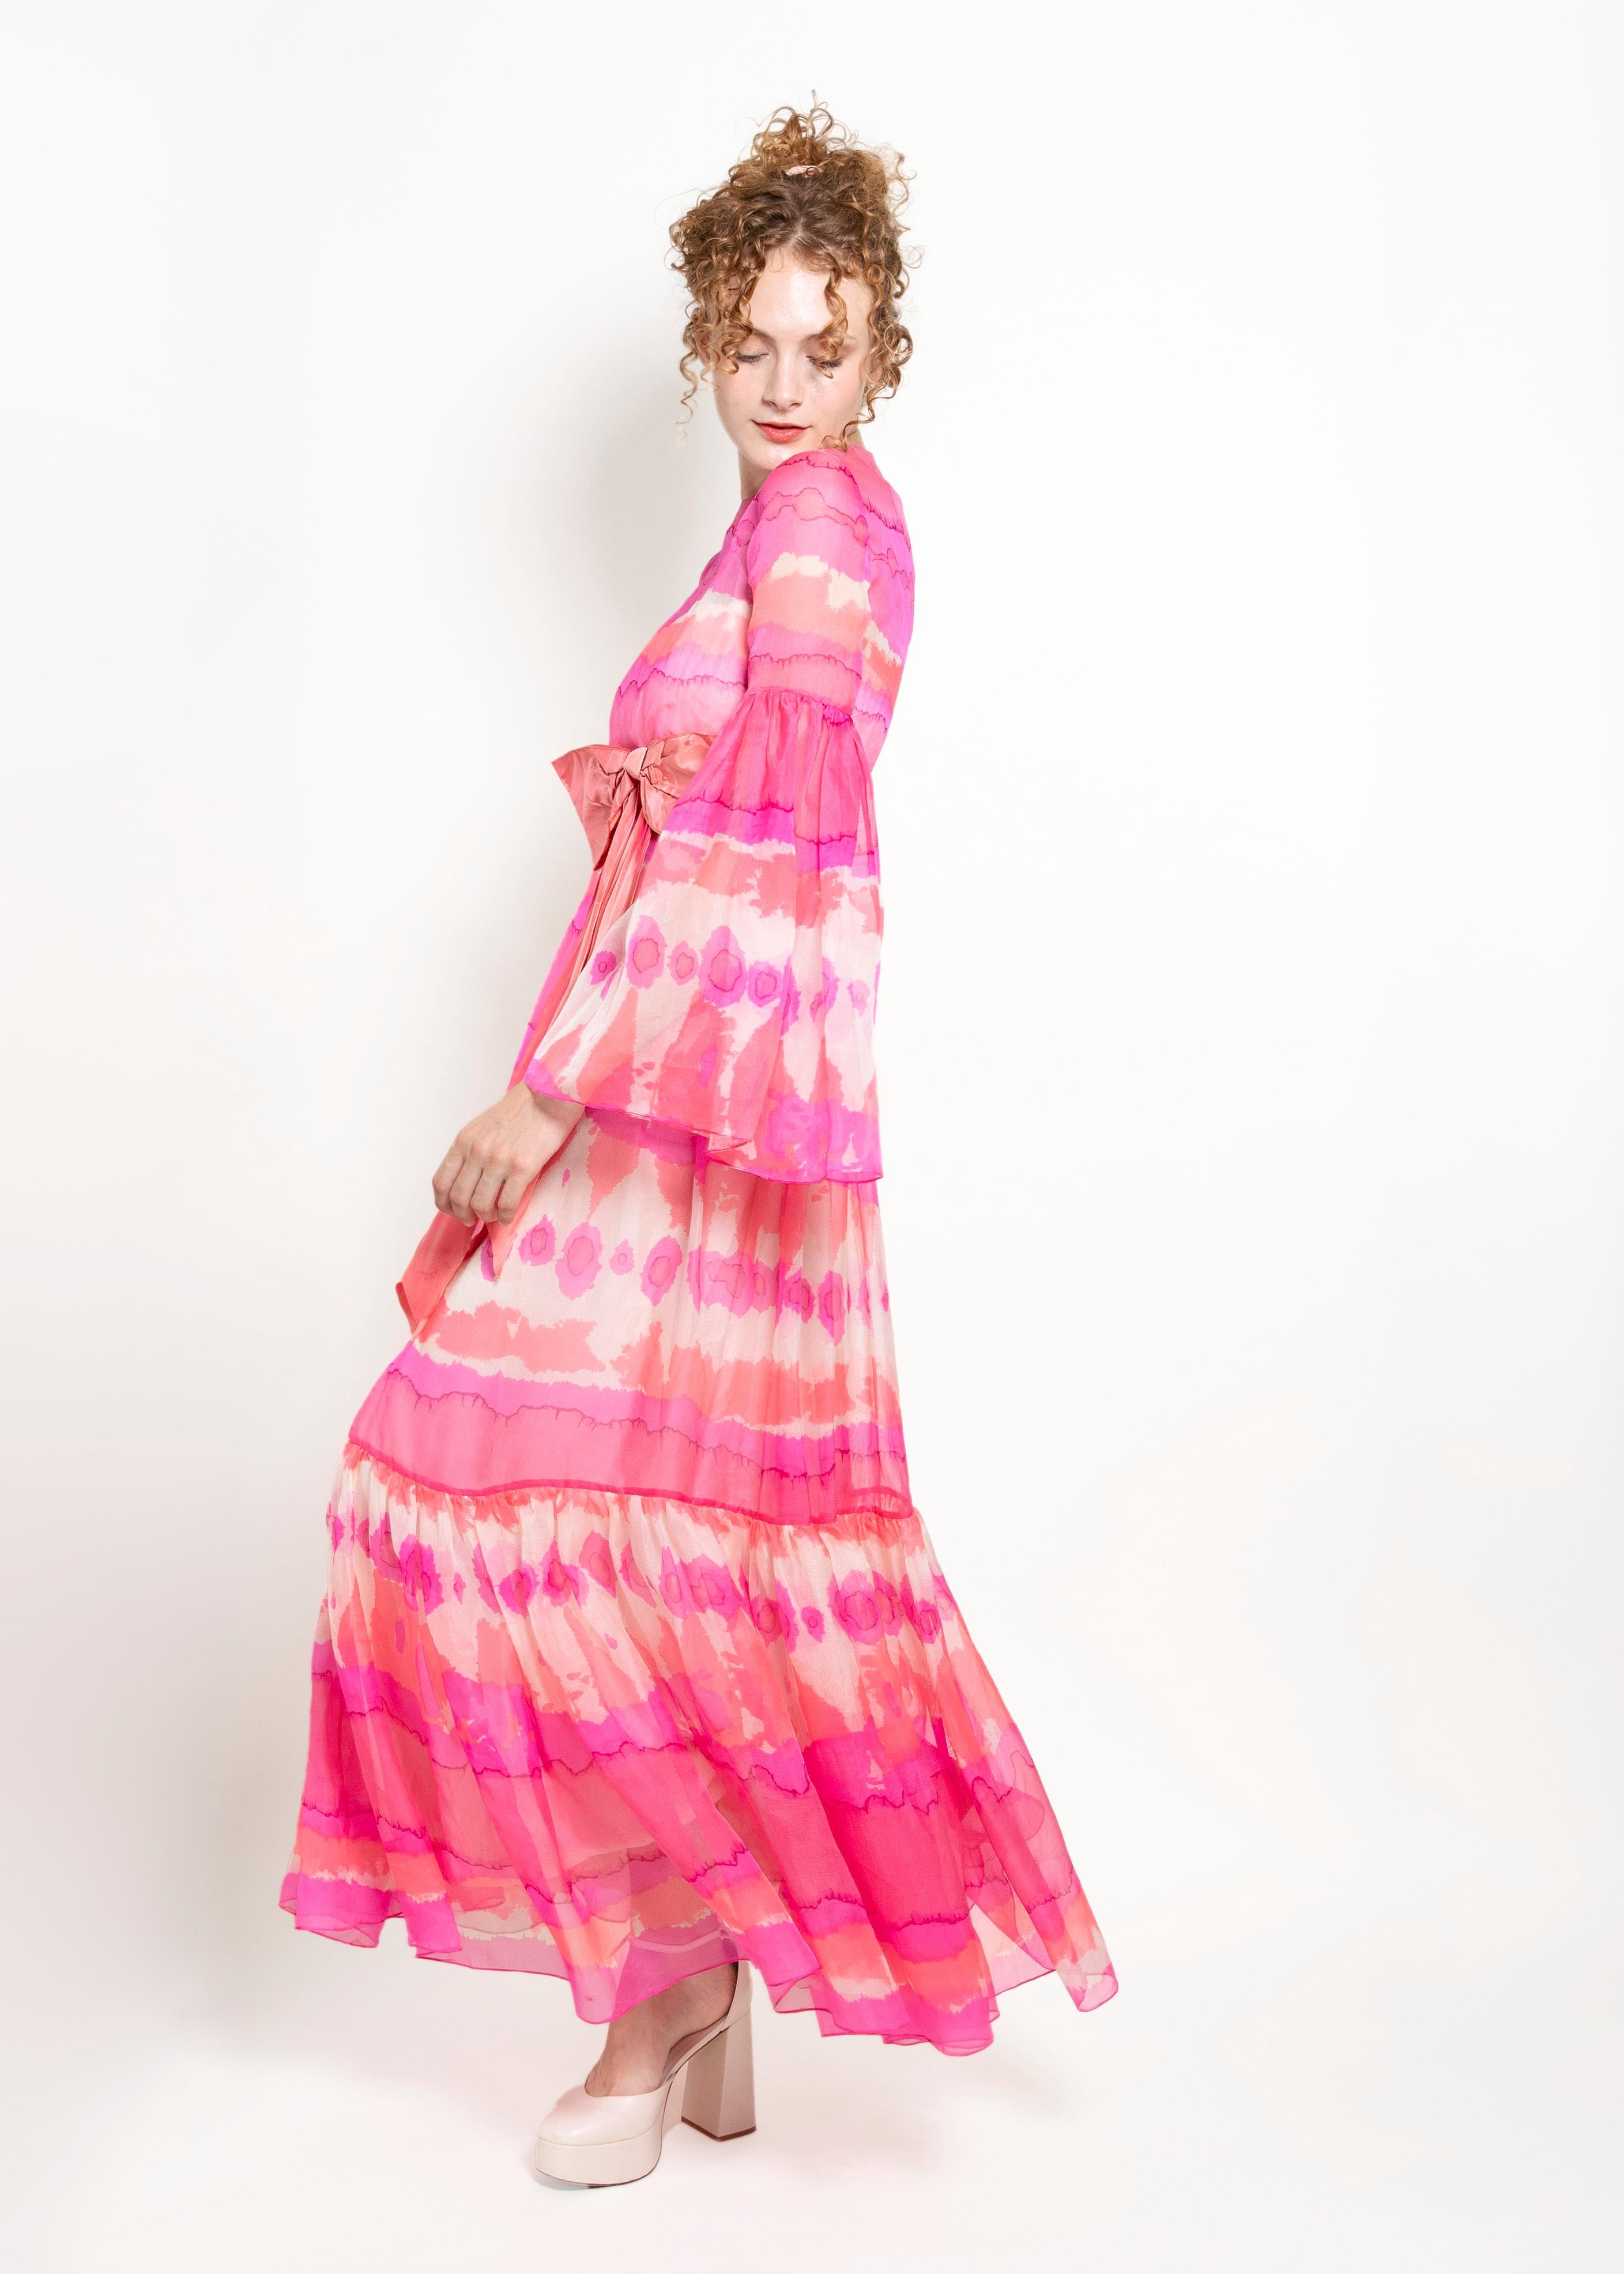 Malcolm Starr is renowned for its timeless designs, and this dress is no exception. It's a rare find that embodies the essence of the brand's vintage charm. Crafted from delicate pink chiffon, this dress exudes grace and charm. The fabric drapes